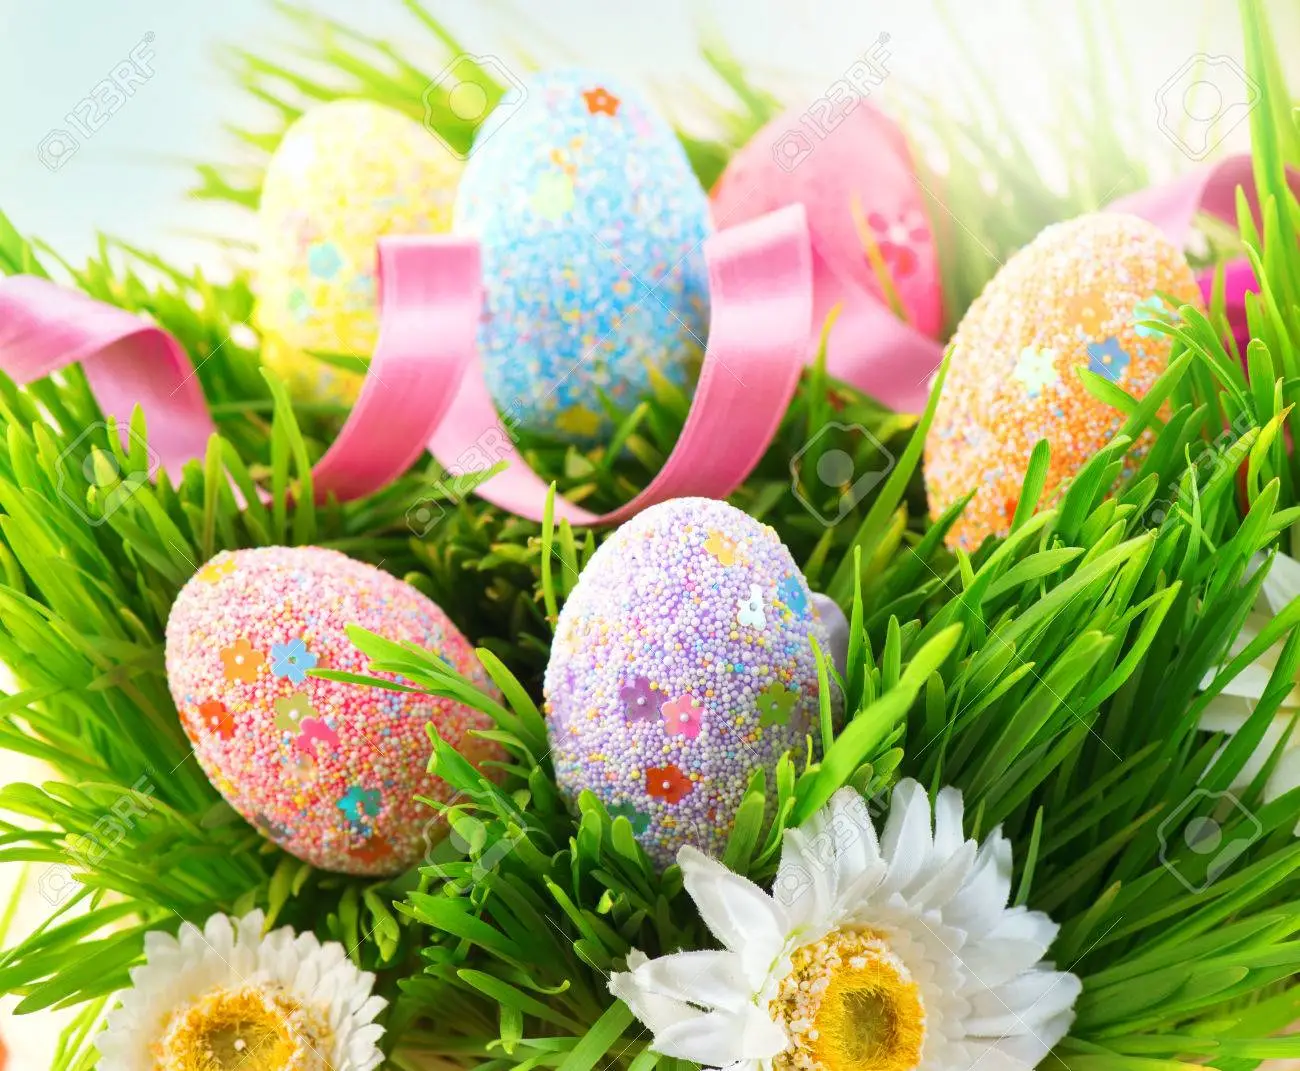 Easter scene background beautiful colorful eggs in spring grass stock photo picture and royalty free image image